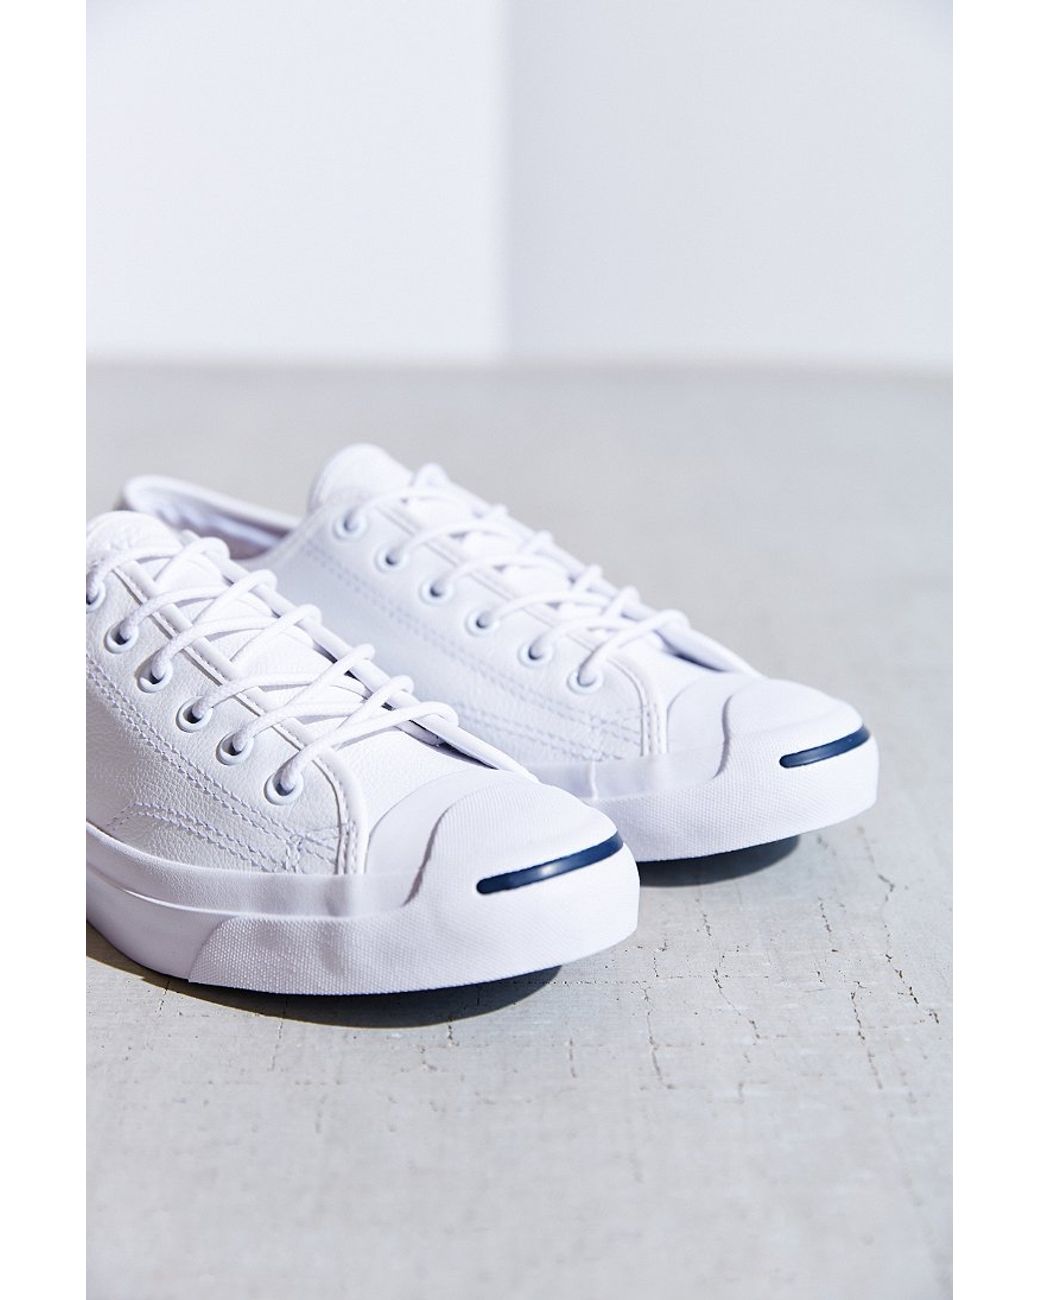 Converse Jack Purcell Tumbled Leather Low-Top Sneaker in White | Lyst